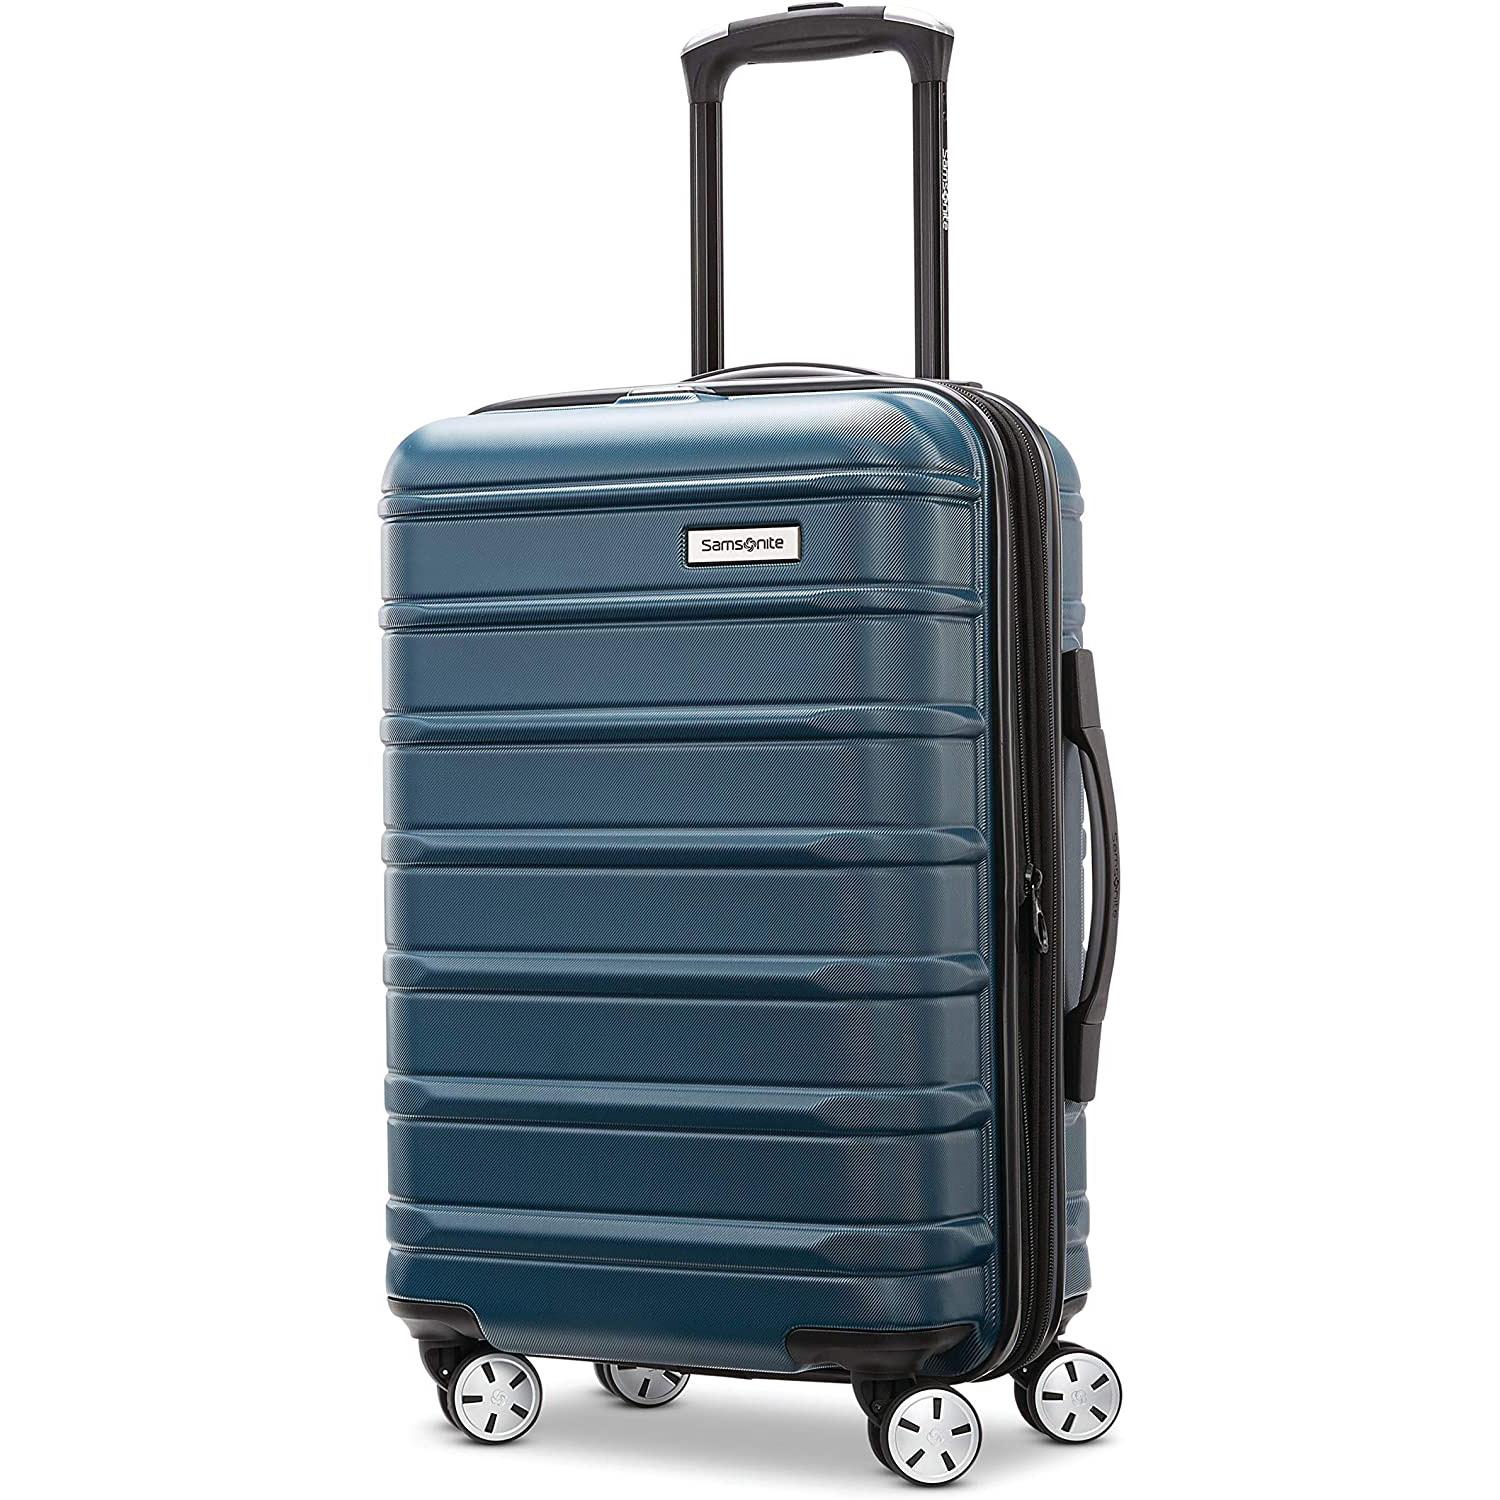 Samsonite Omni 2 20in Hardside Expandable Spinner Carry-On Luggage for $88.20 Shipped